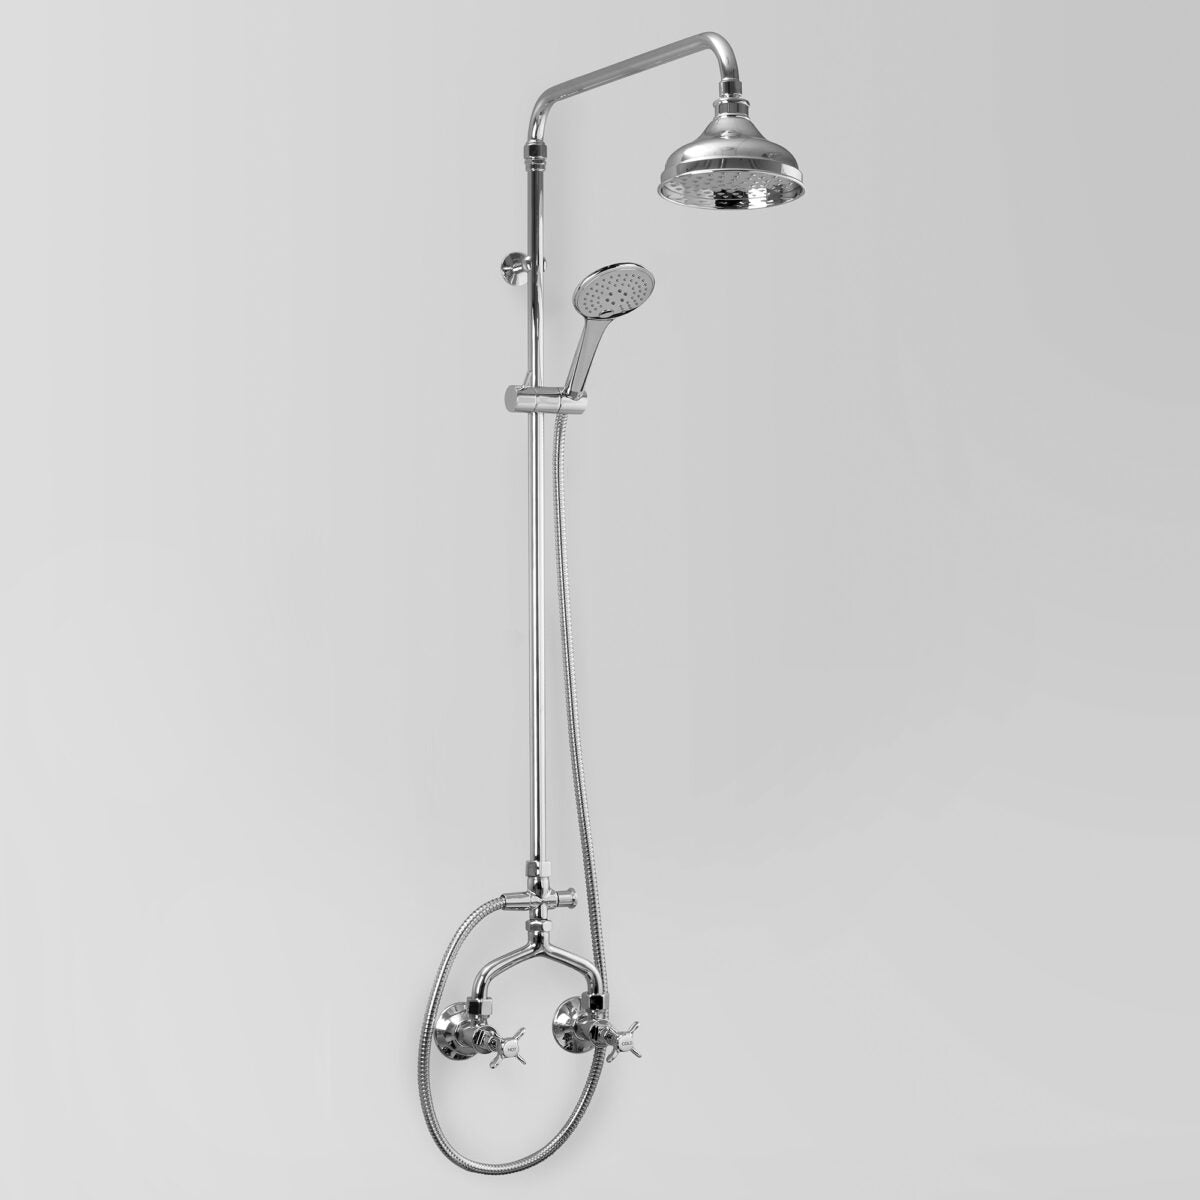 Olde English Exposed Shower Set With 150mm Shower Head & Multi-Function Hand Shower